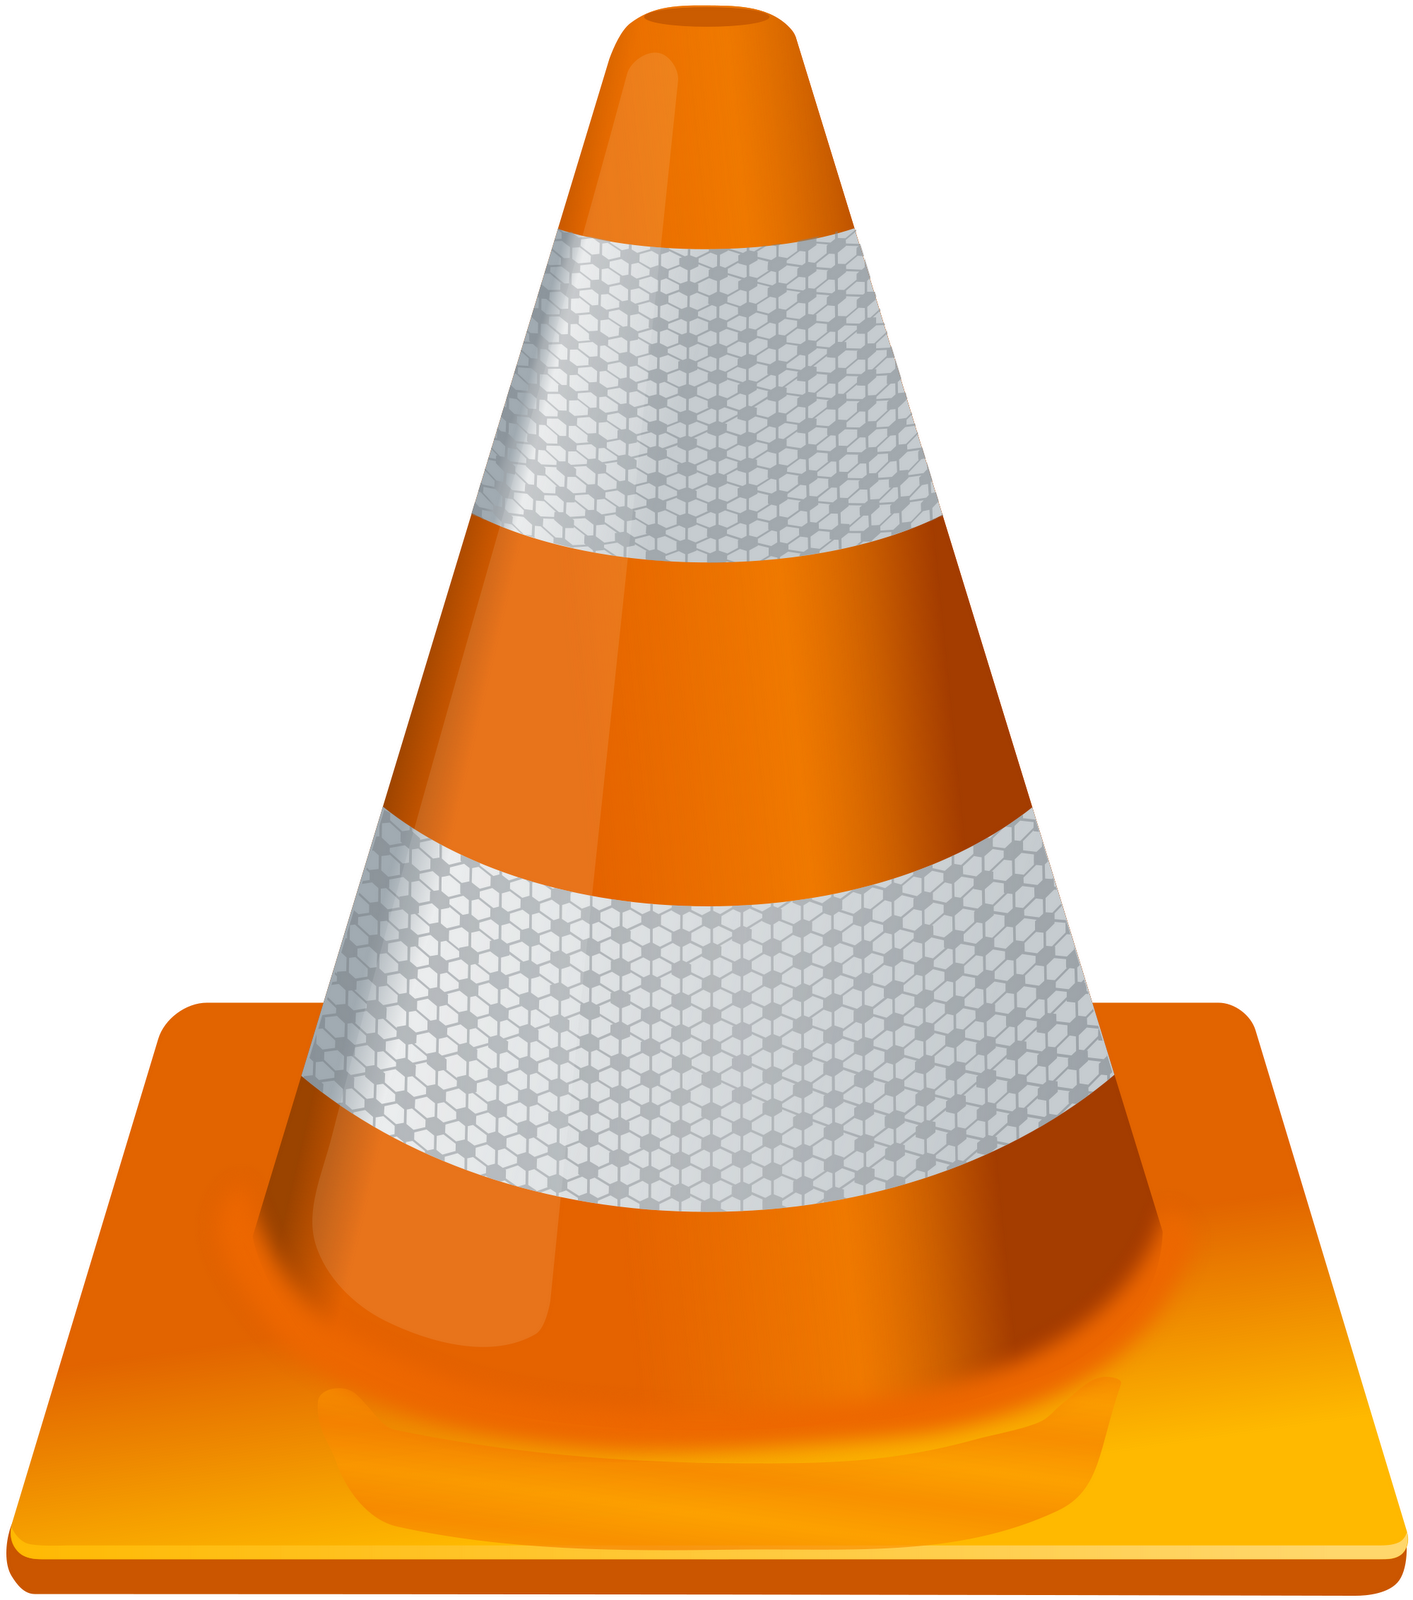 Free Download VLC Media Player 2.1.3 Software or ...